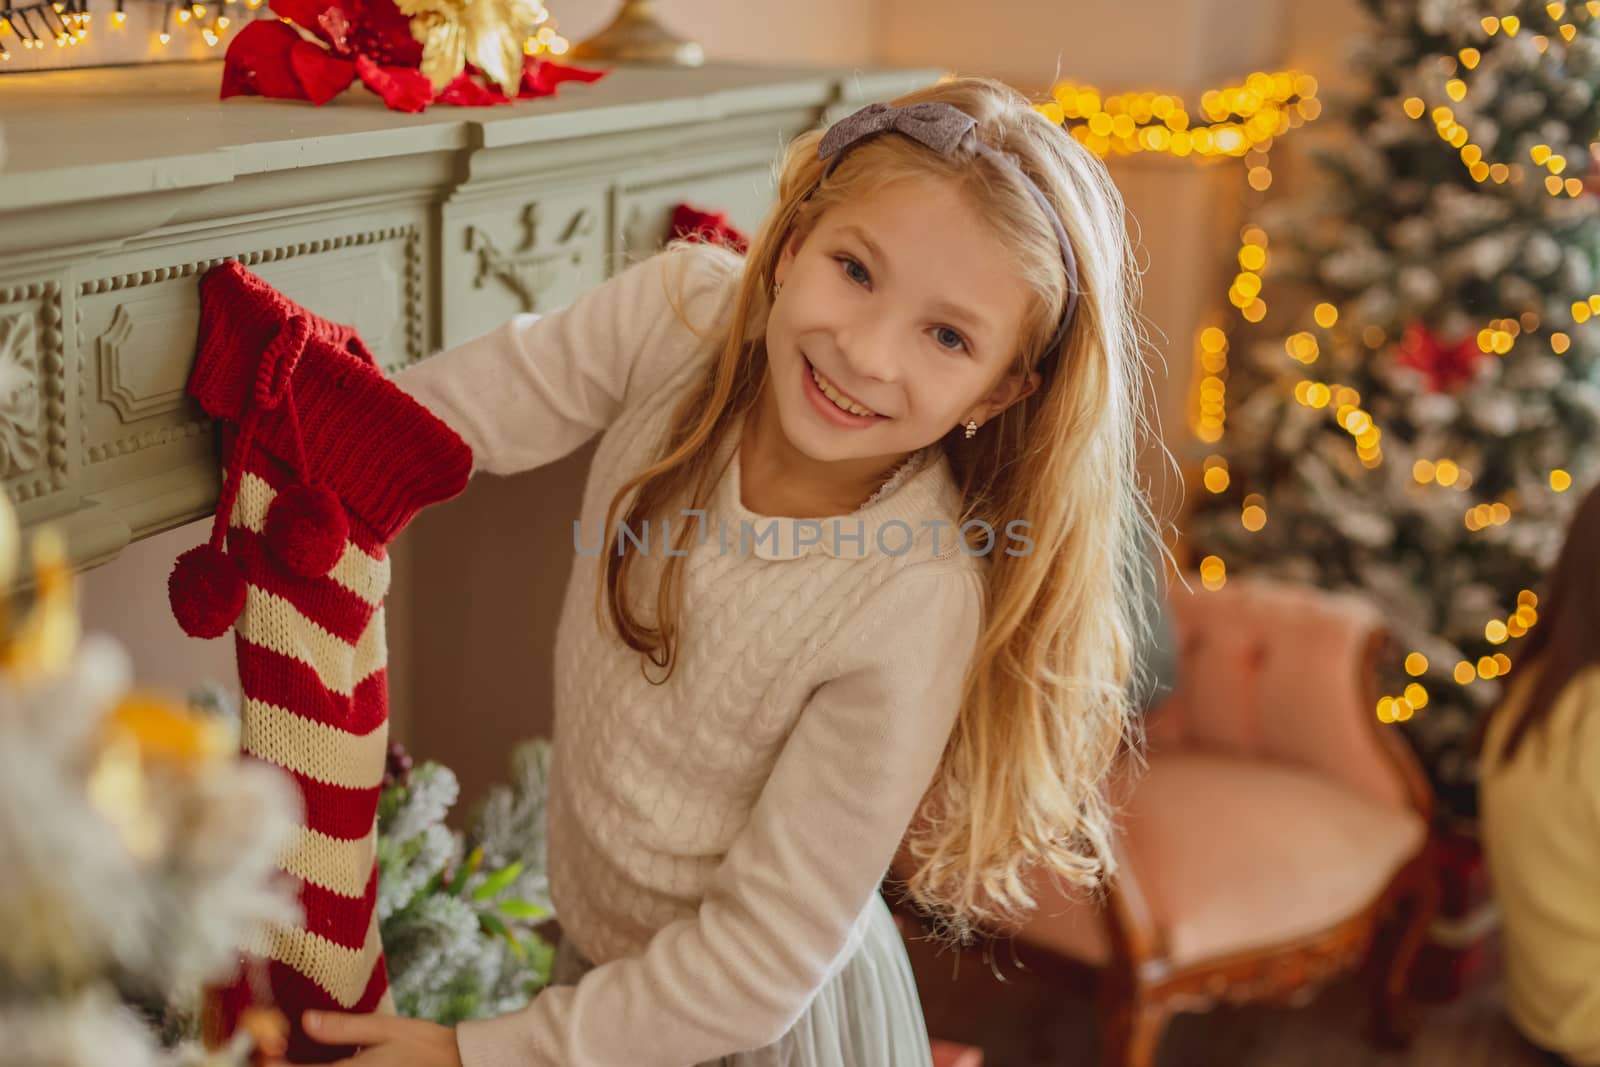 Excited cute teen girl taking present from Christmas socks